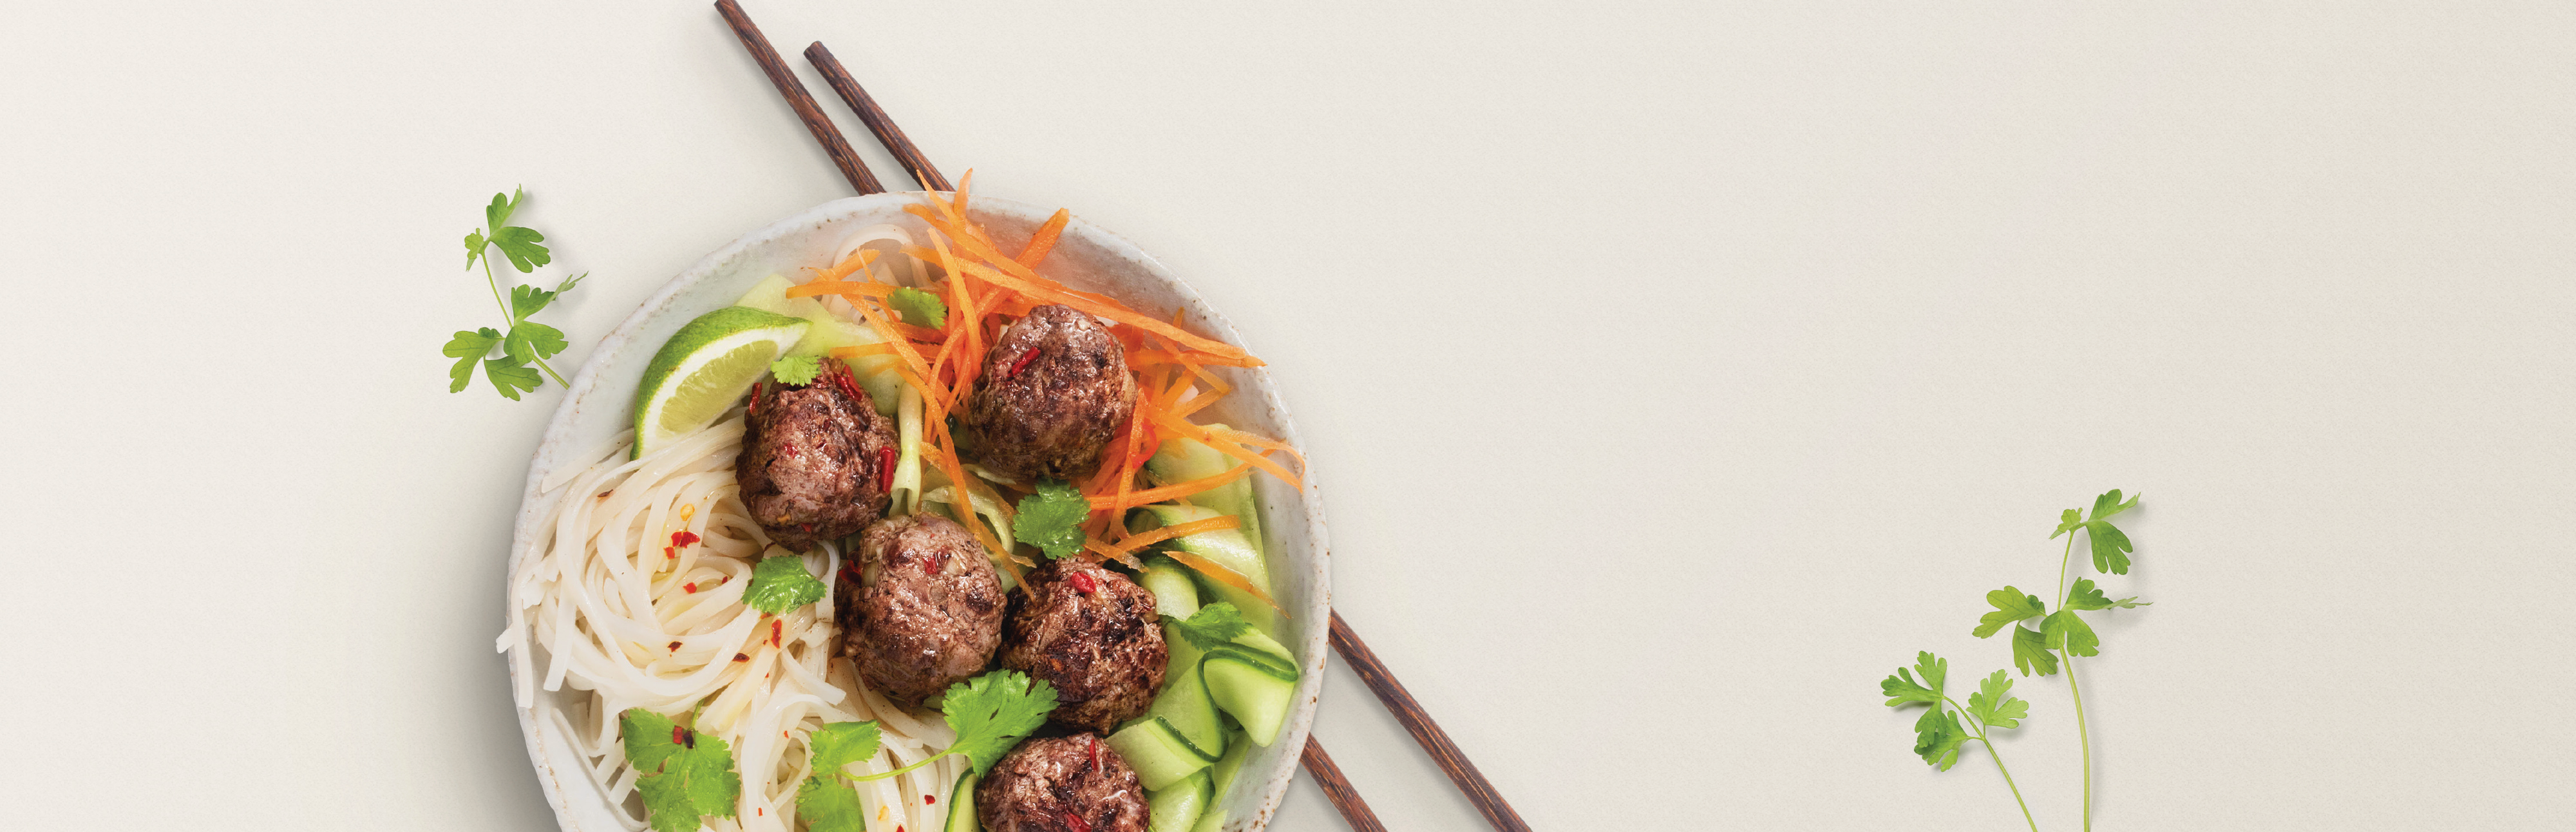 a venison meatball and noodles dish in a white bowl